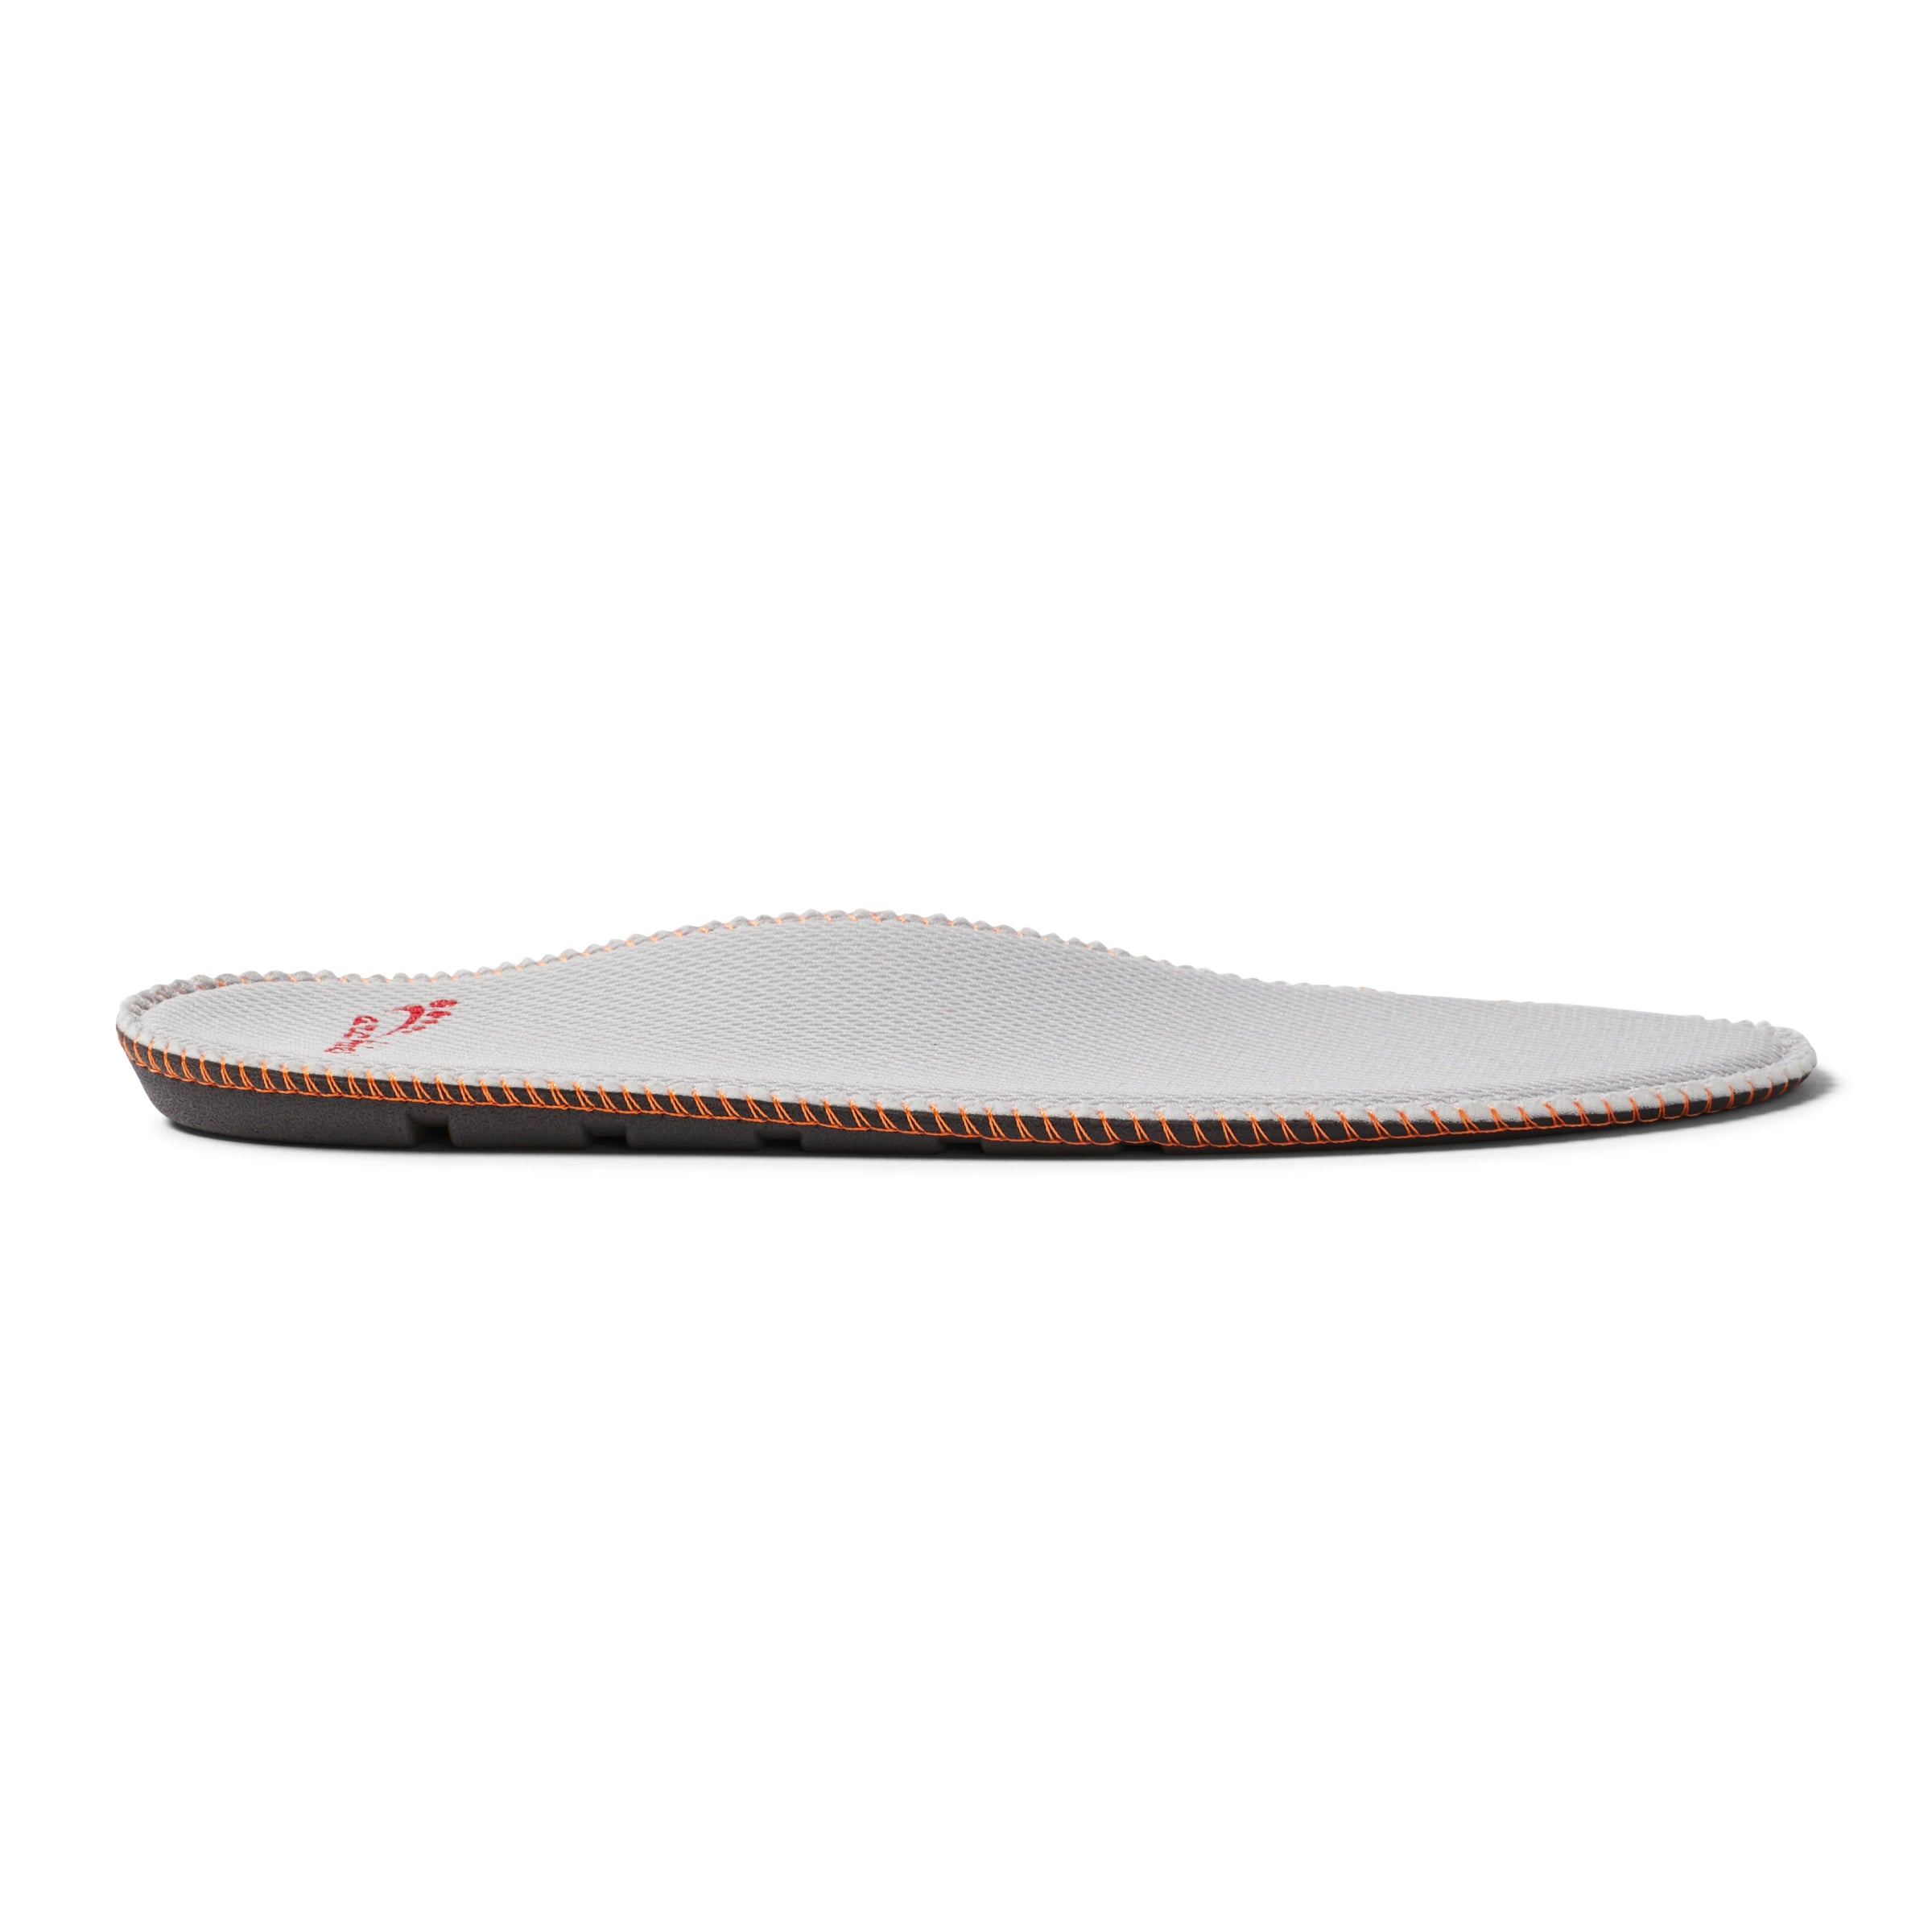 INSOLES ARCH SUPPORT - WORK BOOT